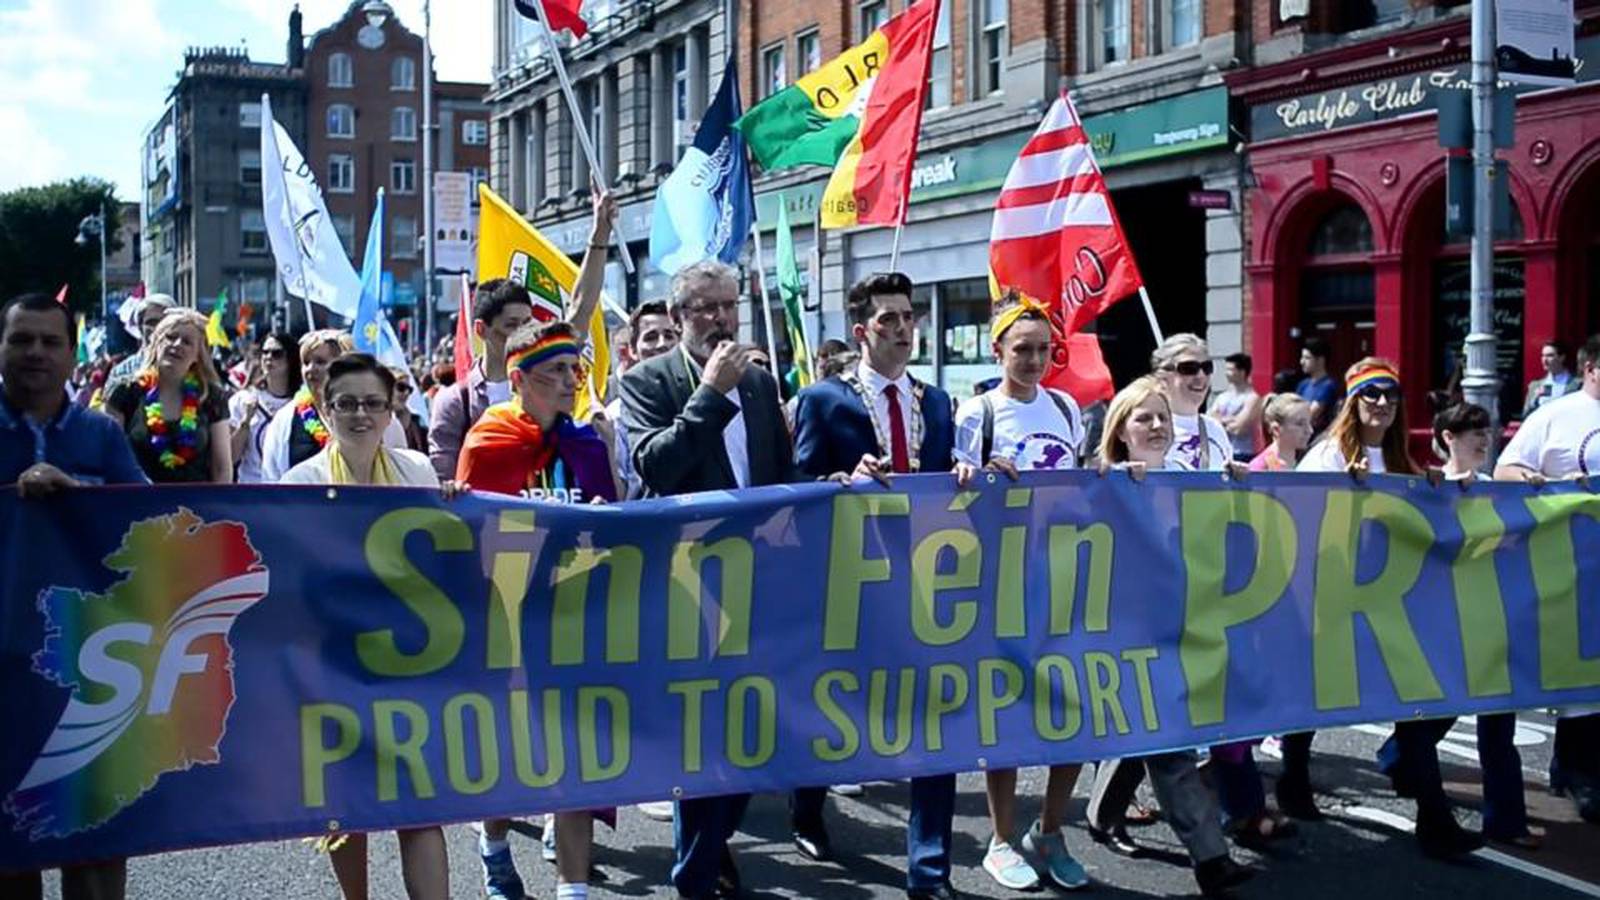 Rainbows come out over the crowd at Dublin Pride Parade The Irish Times